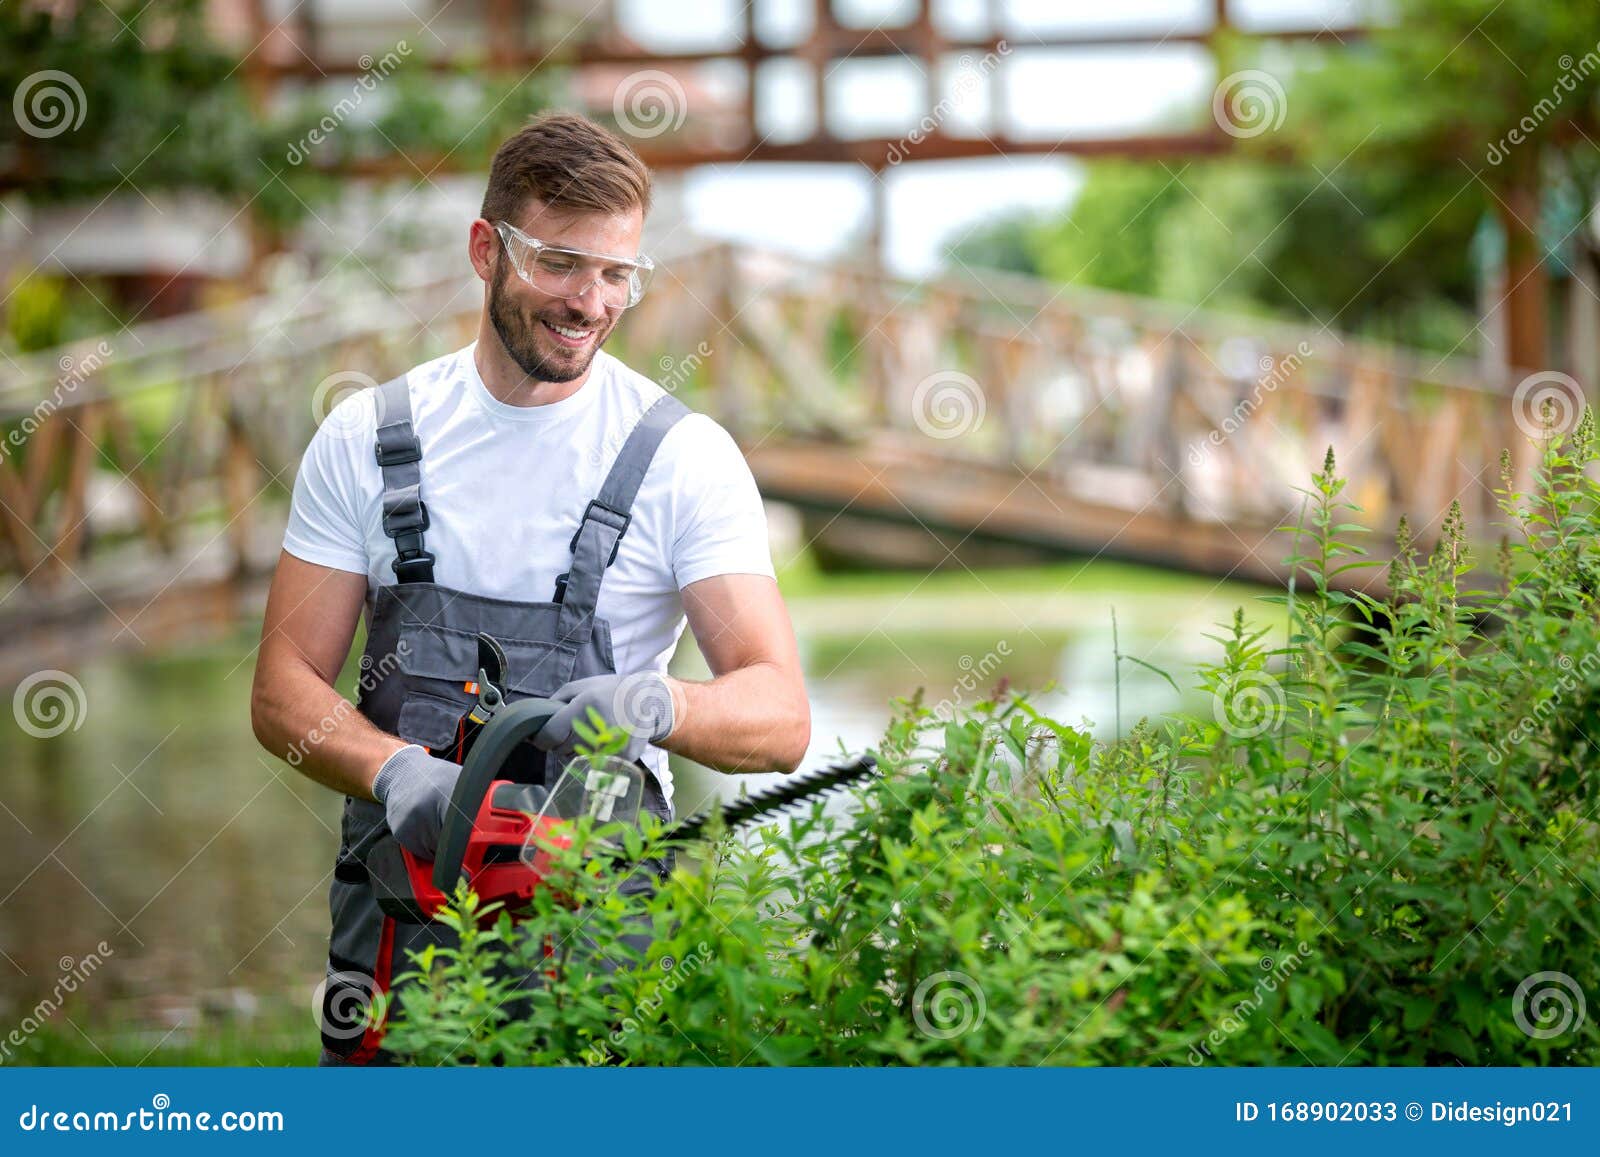 465 Gardening Outfit Stock Photos - Free & Royalty-Free Stock Photos from  Dreamstime